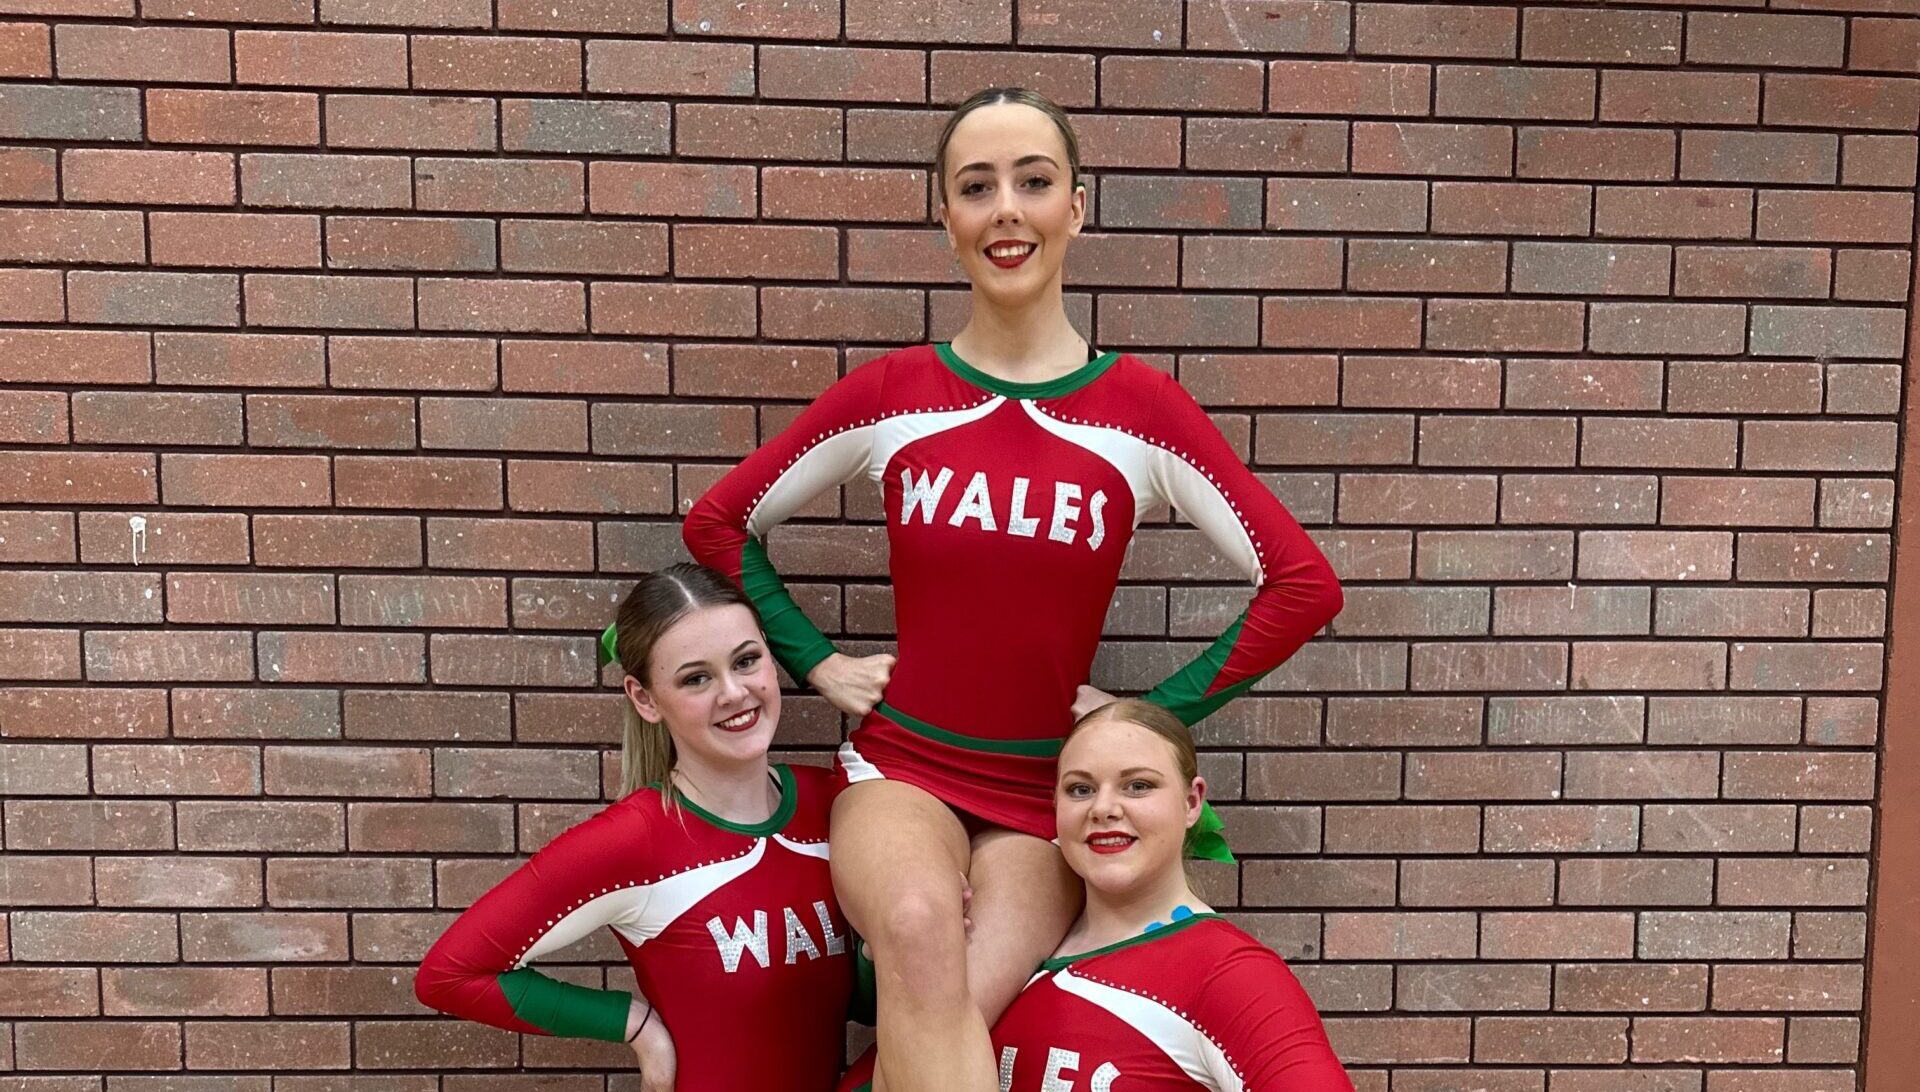 Amelia, Libby and Ruby head to the US to compete in global cheerleading championships